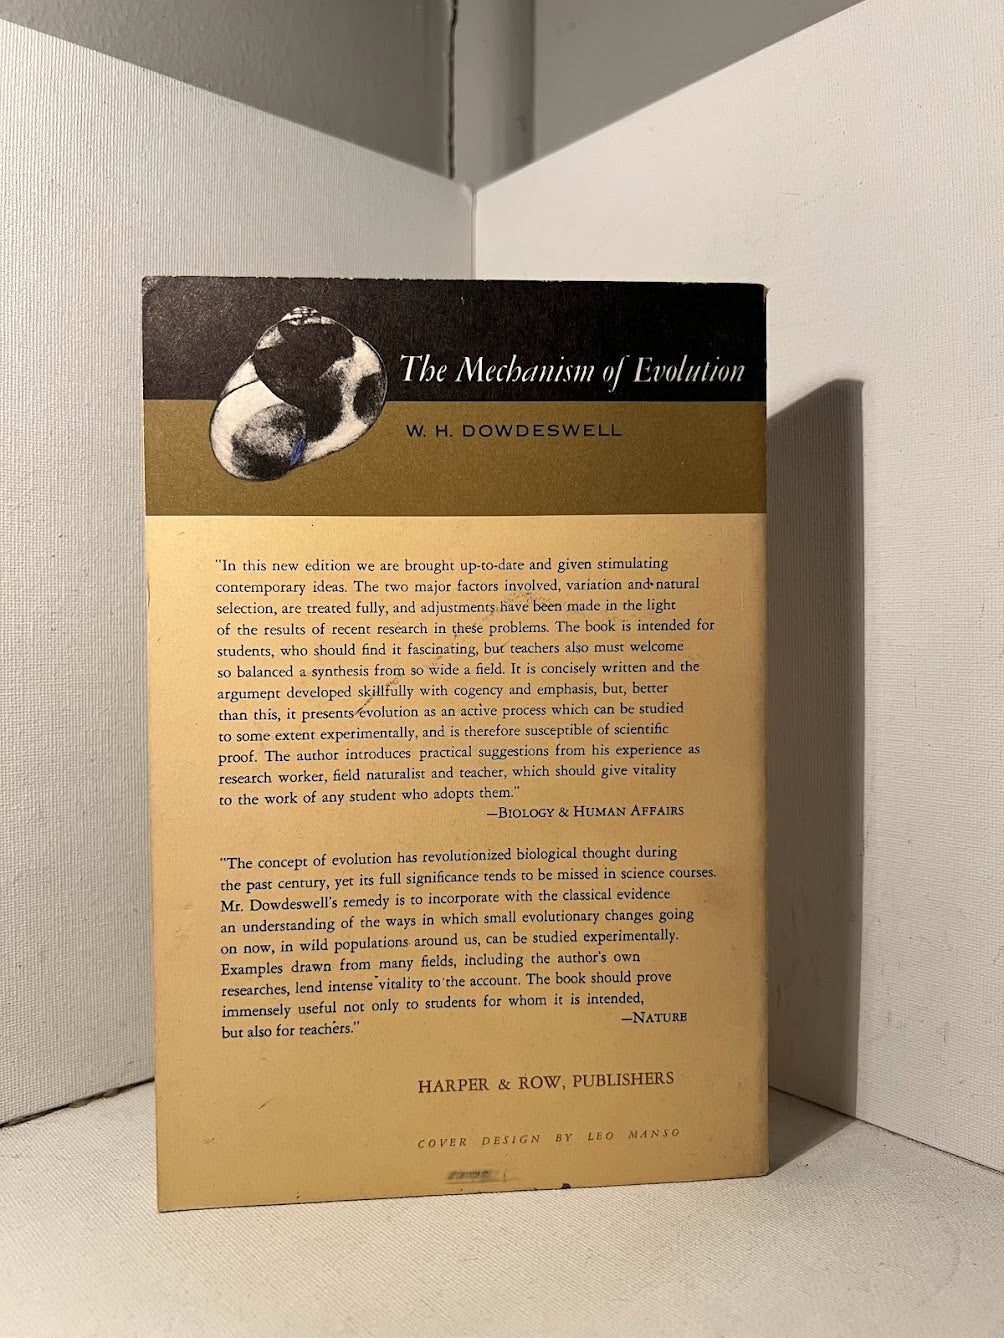 The Mechanism of Evolution by W.H. Dowdeswell